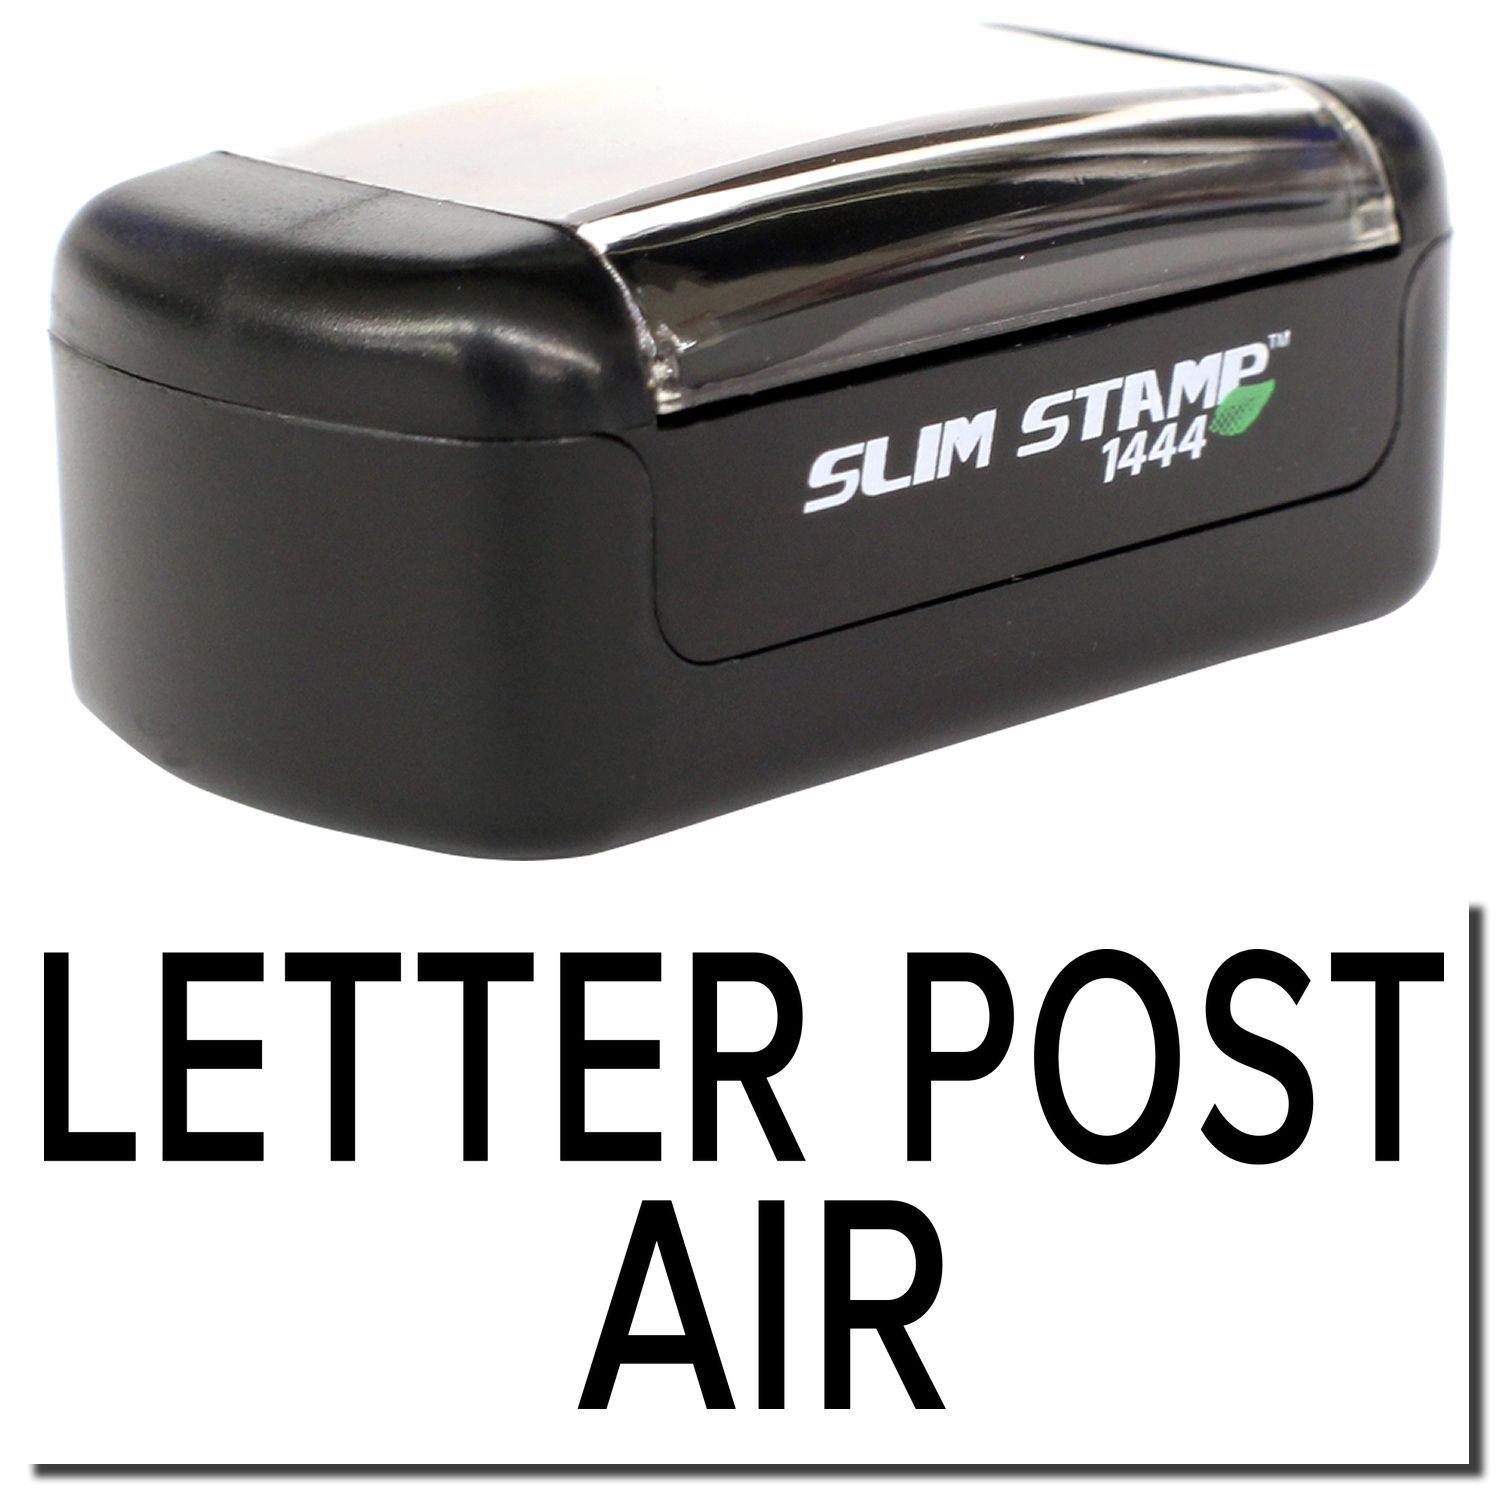 A stock office pre-inked stamp with a stamped image showing how the text "LETTER POST AIR" is displayed after stamping.